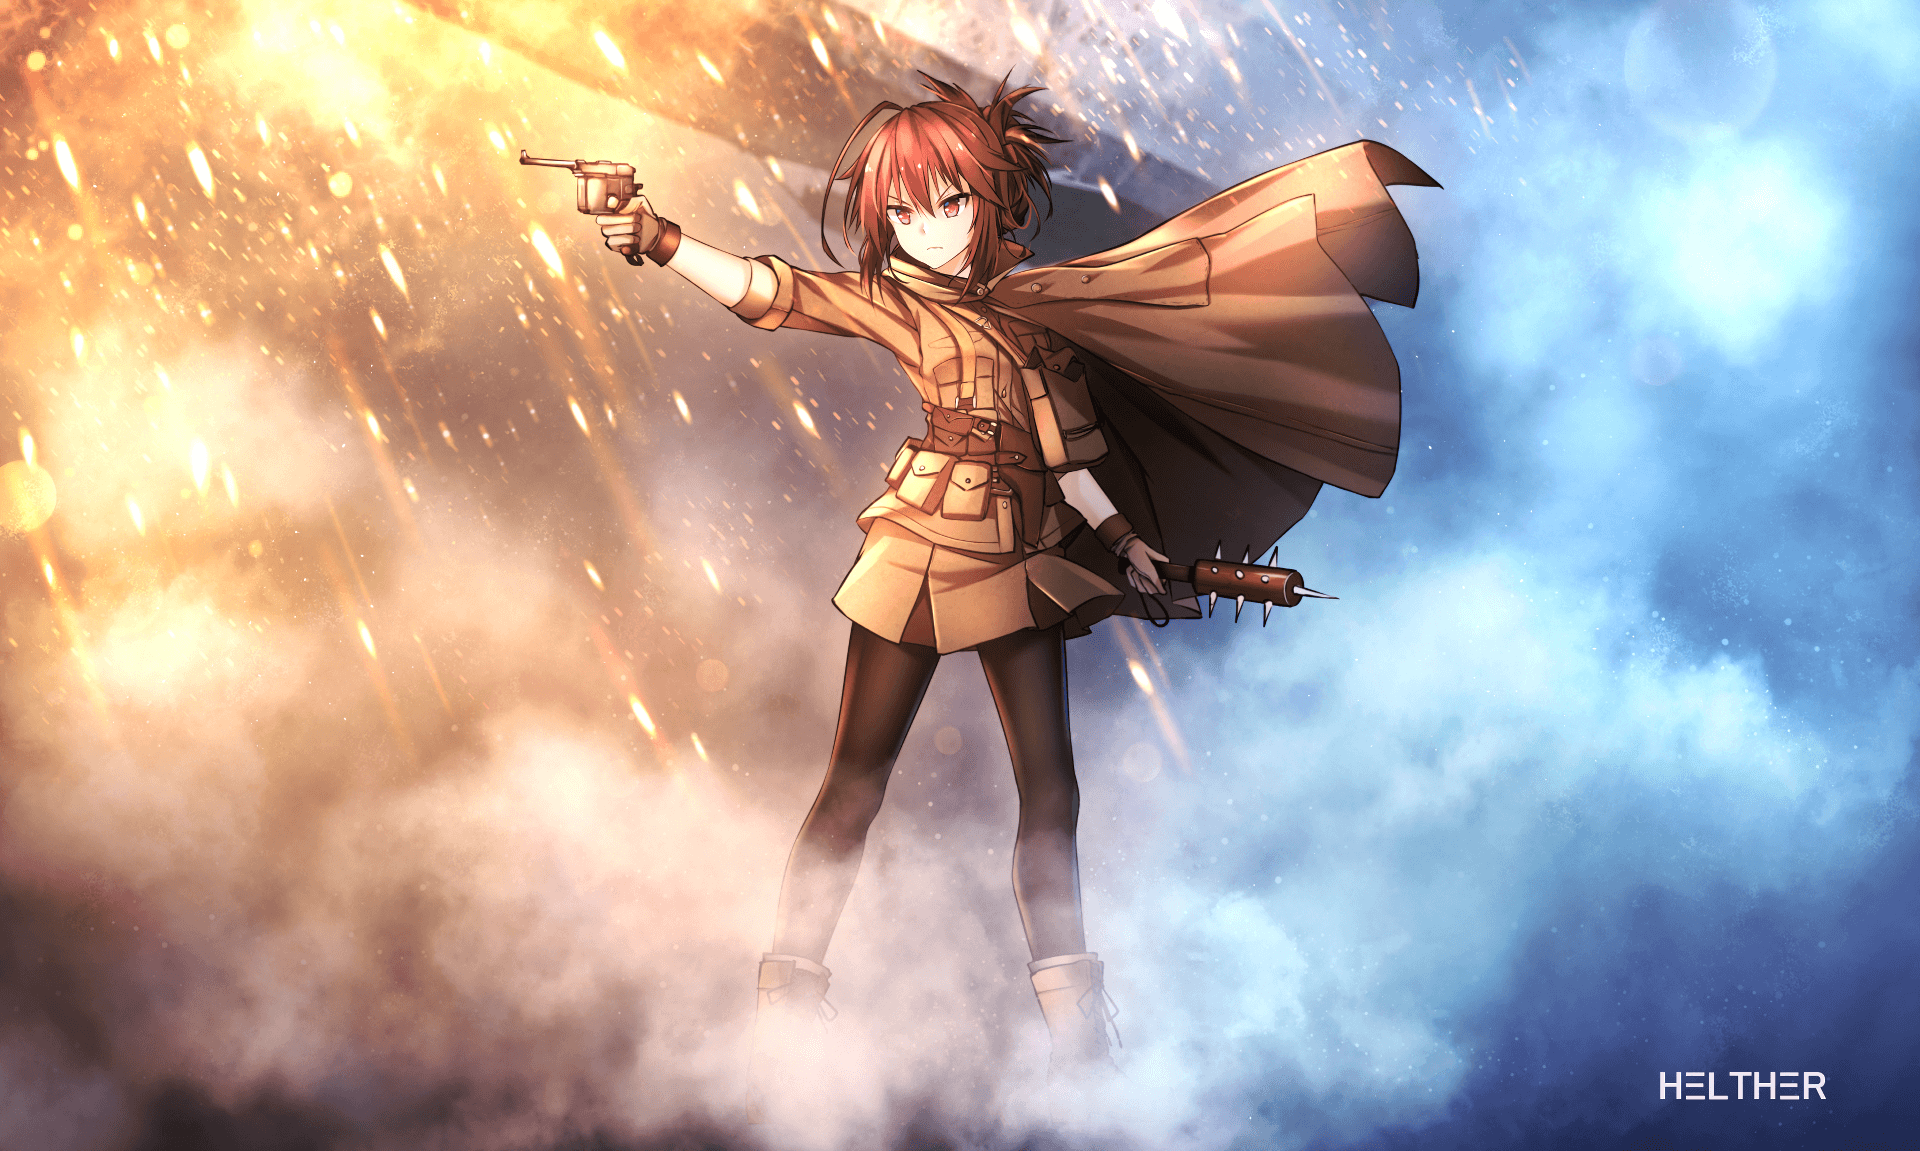 Wallpaper ID: 740302 / japanese, orange hair, two sword, japanese clothes,  Bleach, anime, shihakusho, Gotei 13, battlefield, reiat to see, boy, asian,  new power, fight, game free download